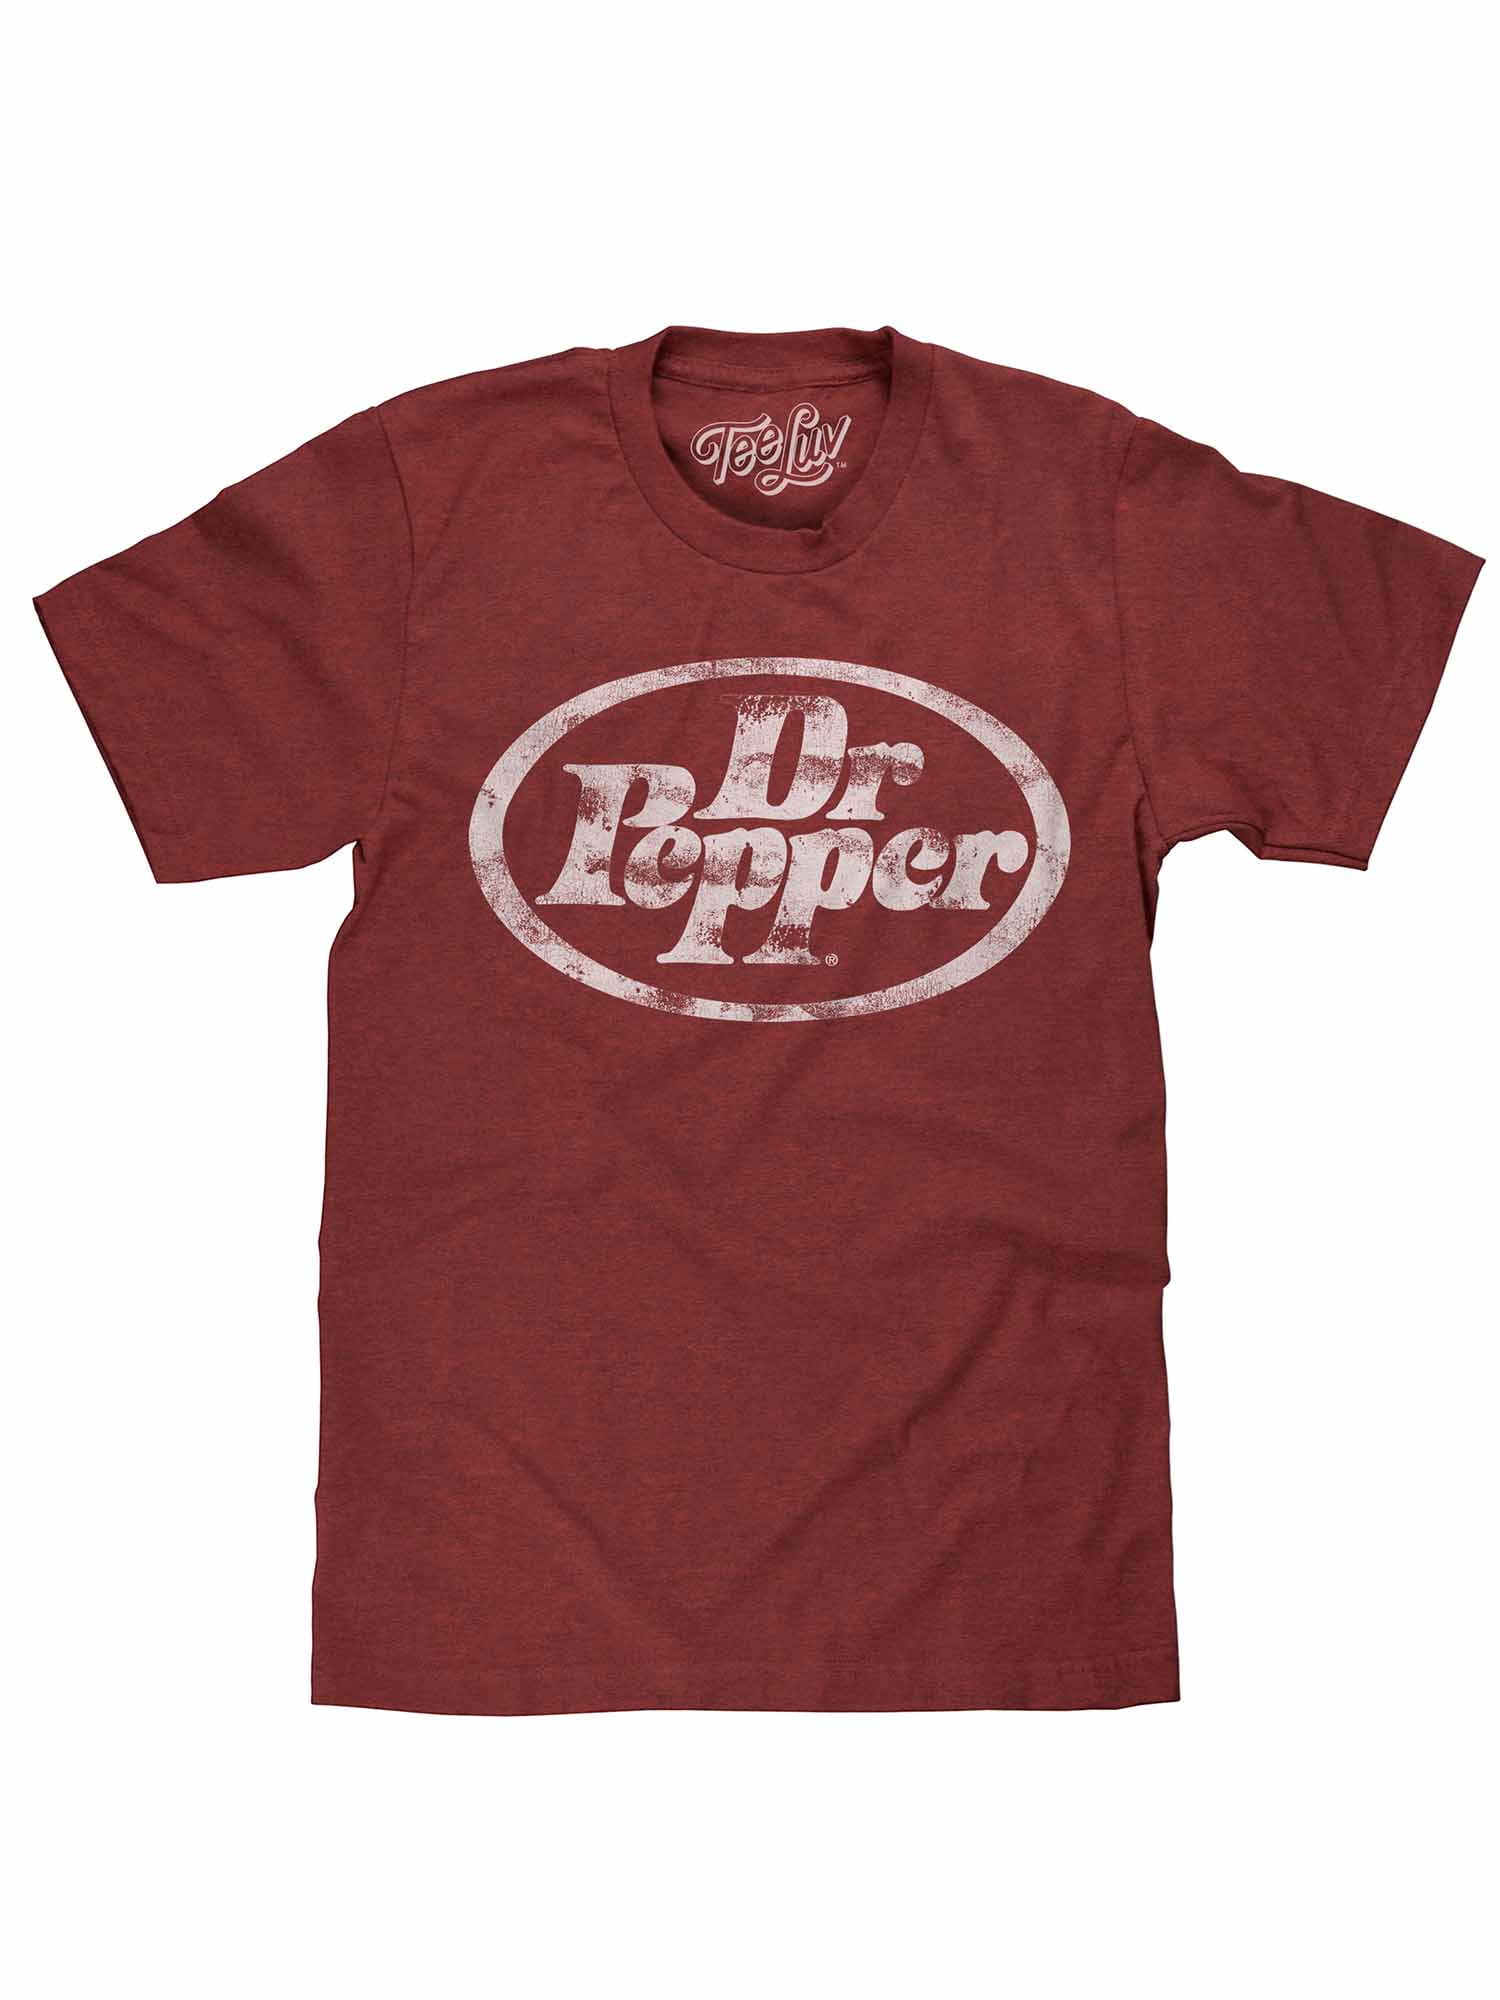 Dr Pepper side logo T-shirt Tee Large burgundy heather distressed BRAND NEW 